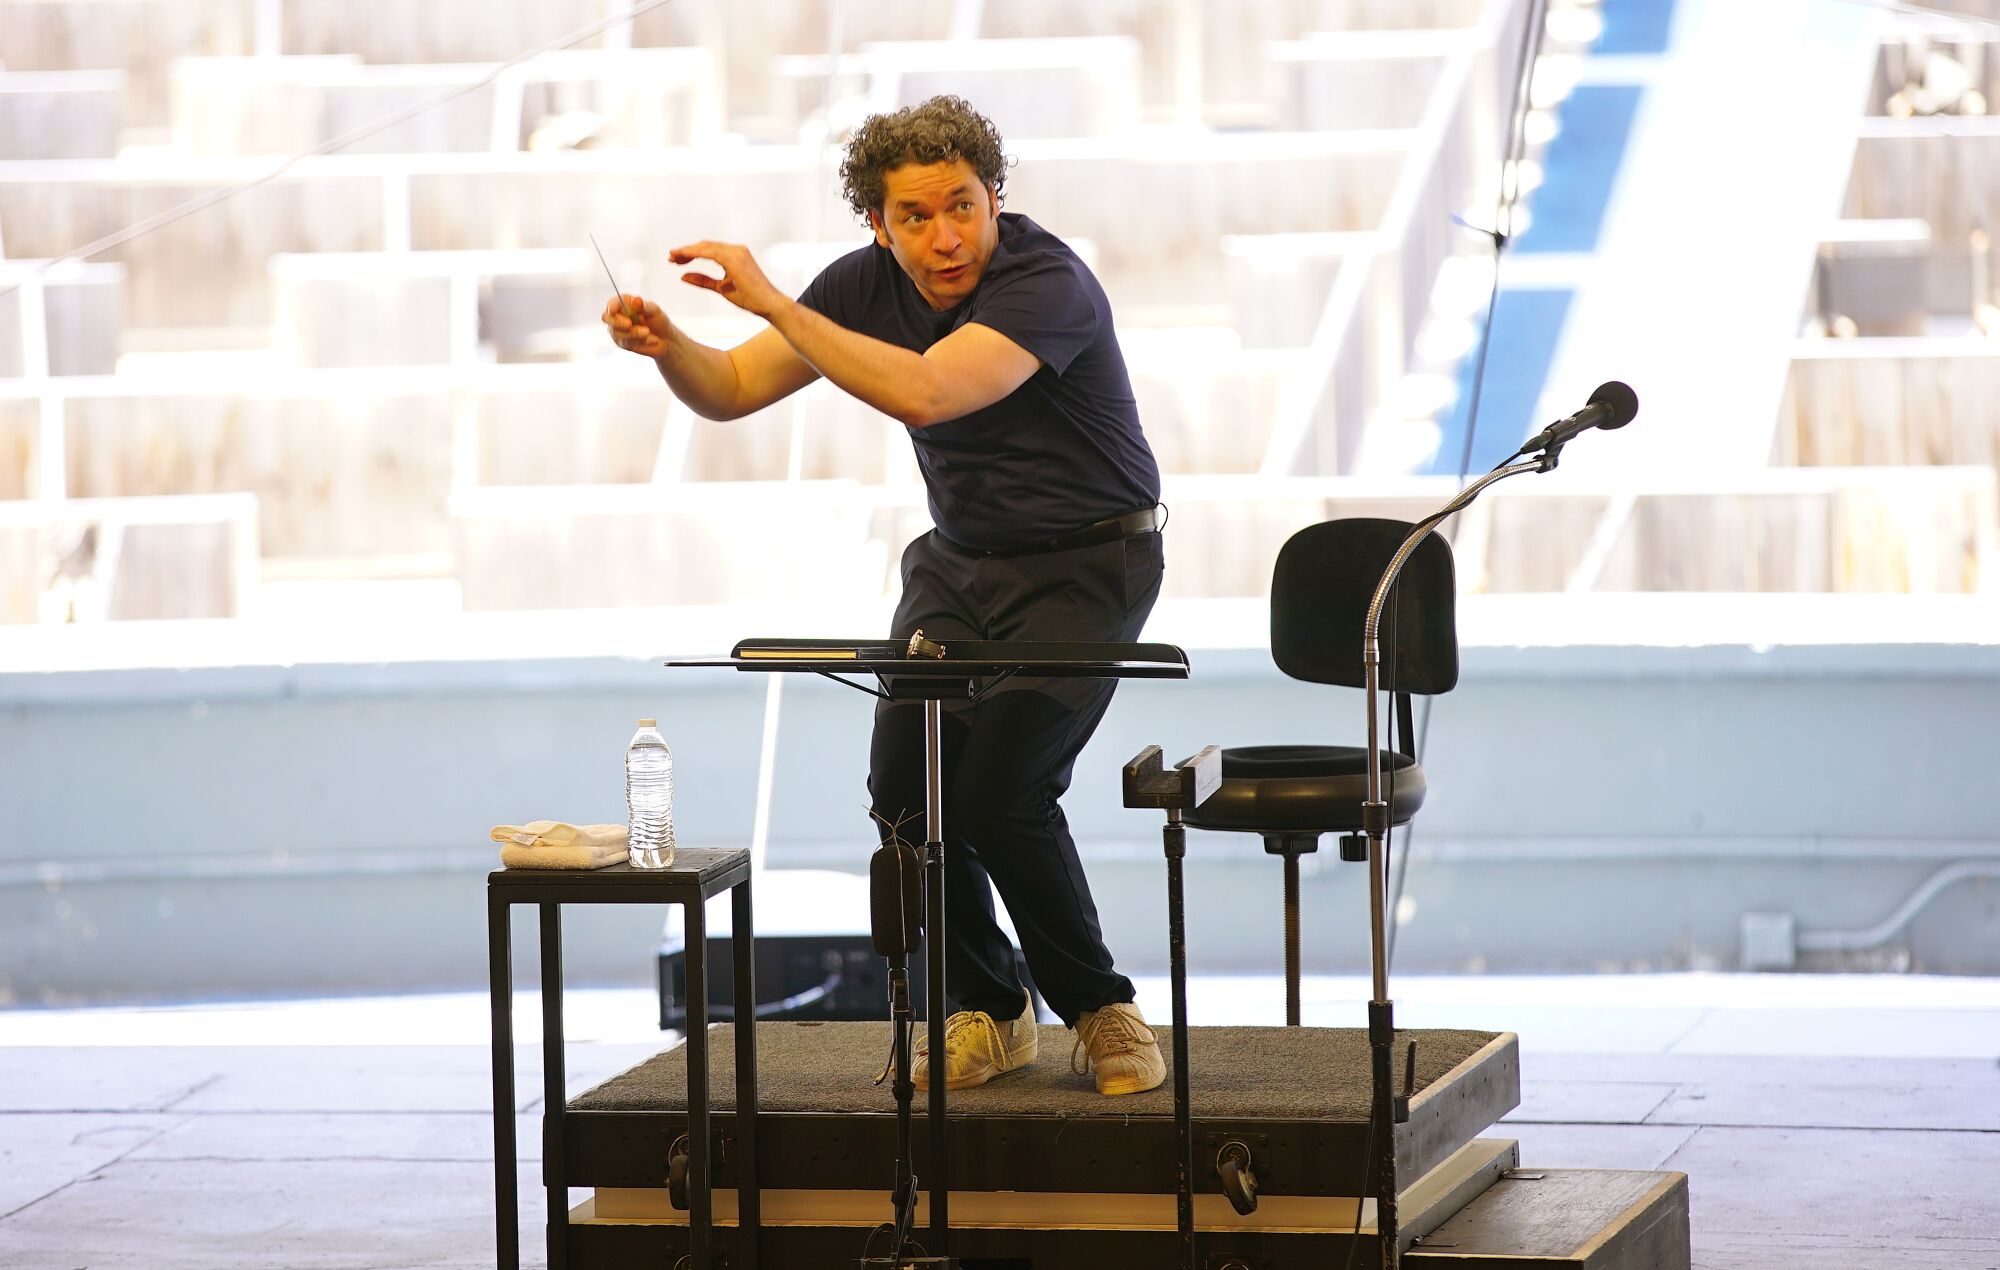 Dudamel conducts rehearsal with empty seats visible behind him